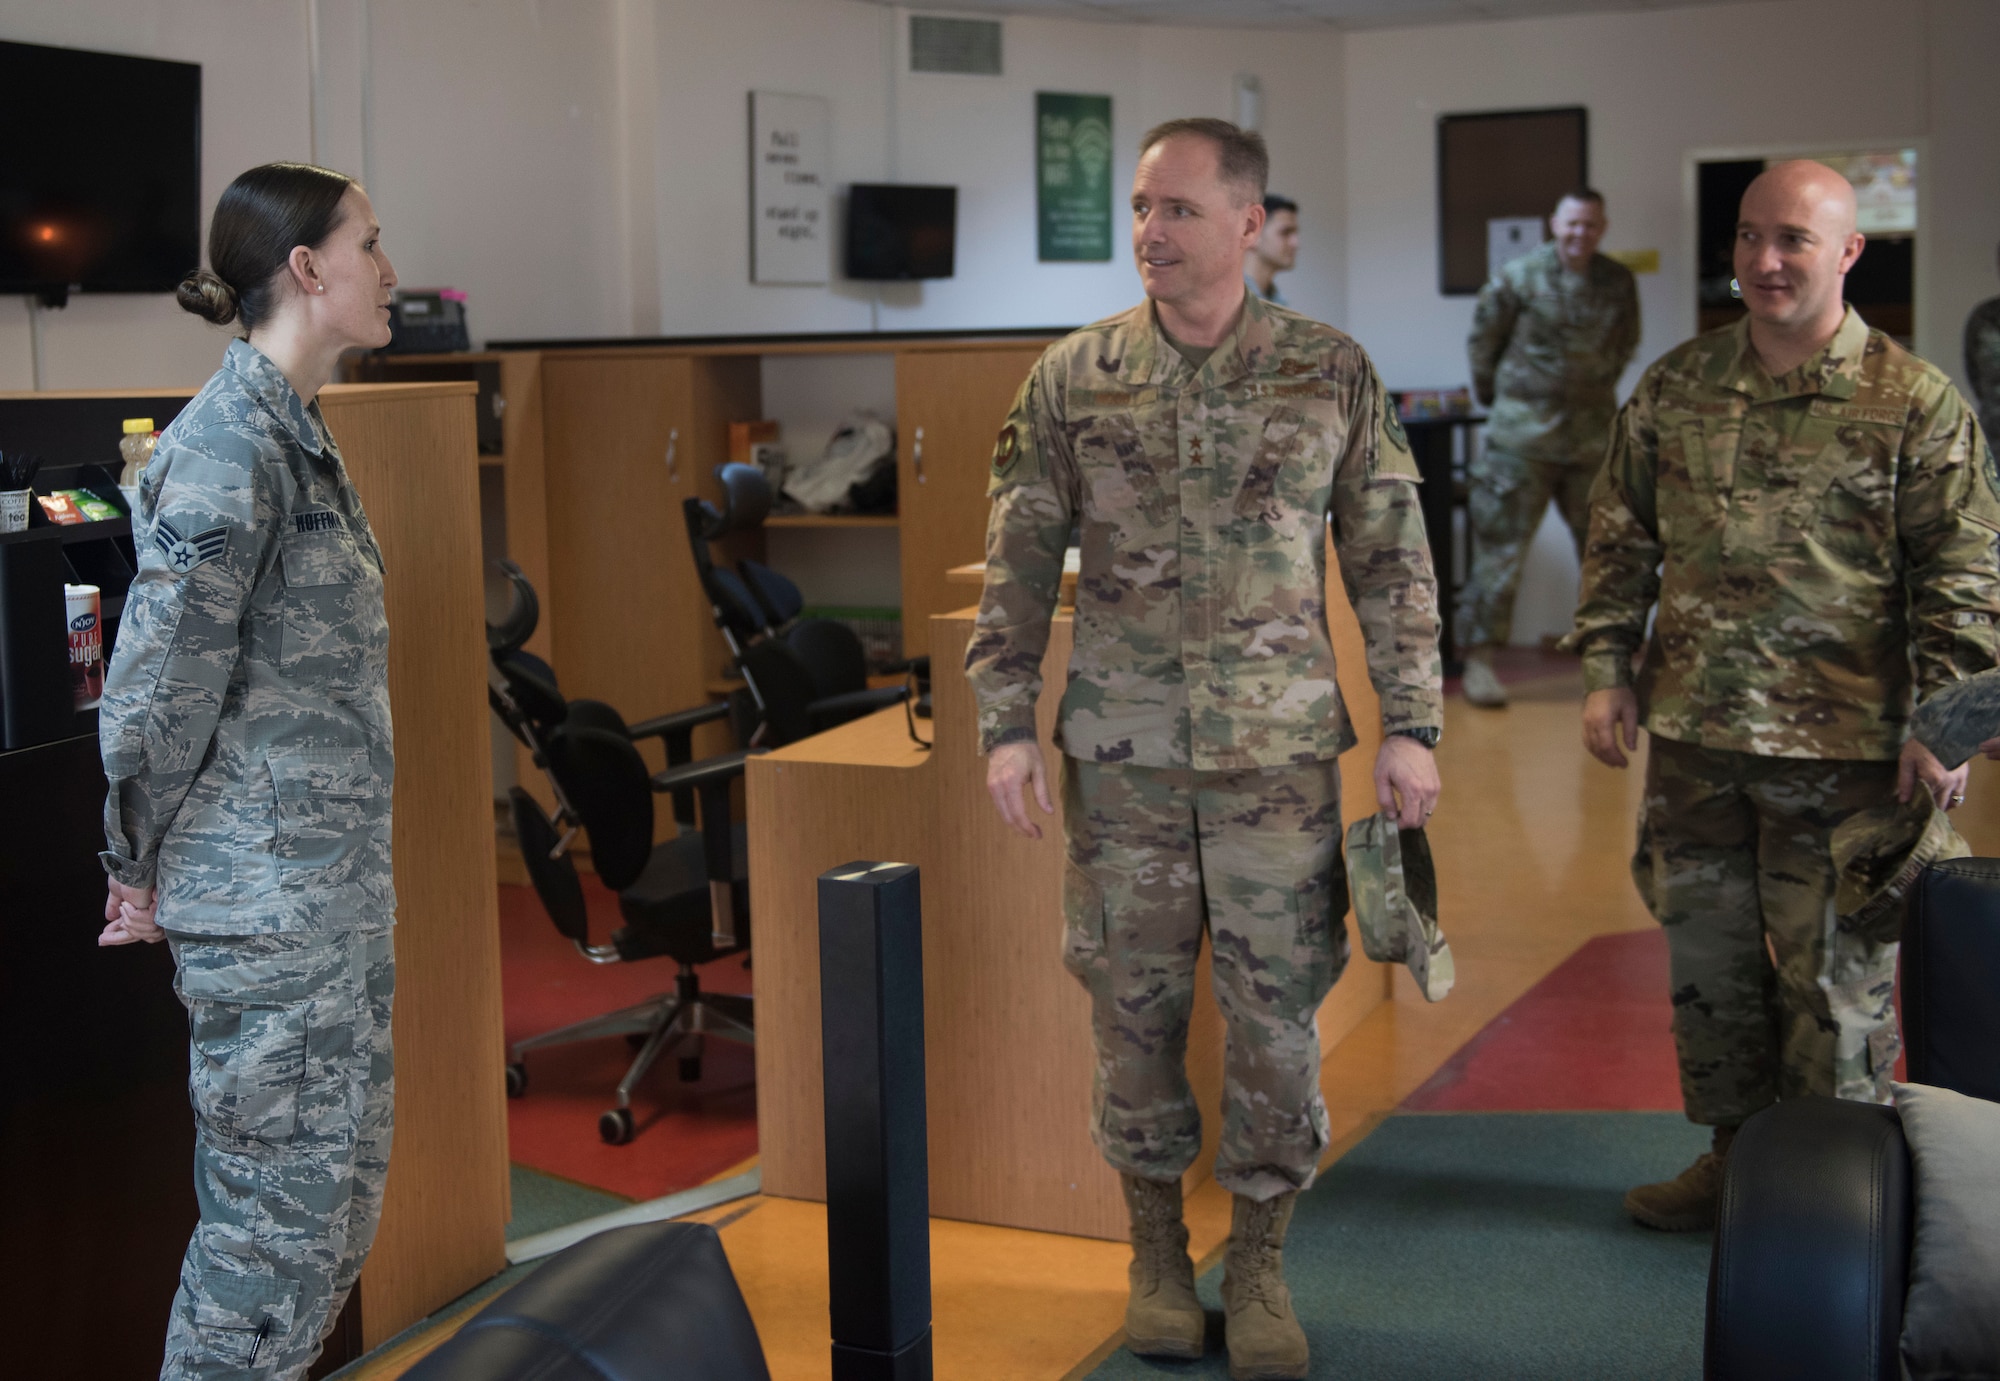 Senior Airman Kayla Hoffman, 728th Air Mobility Squadron commander’s support staff, briefs U.S. Air Force Maj. Gen. John M. Wood, and U.S. Air Force Chief Master Sgt. Anthony Cruz Munoz, Third Air Force command chief, about the Titan’s Refuge, at Incirlik Air Base, Turkey, Feb. 22, 2019.